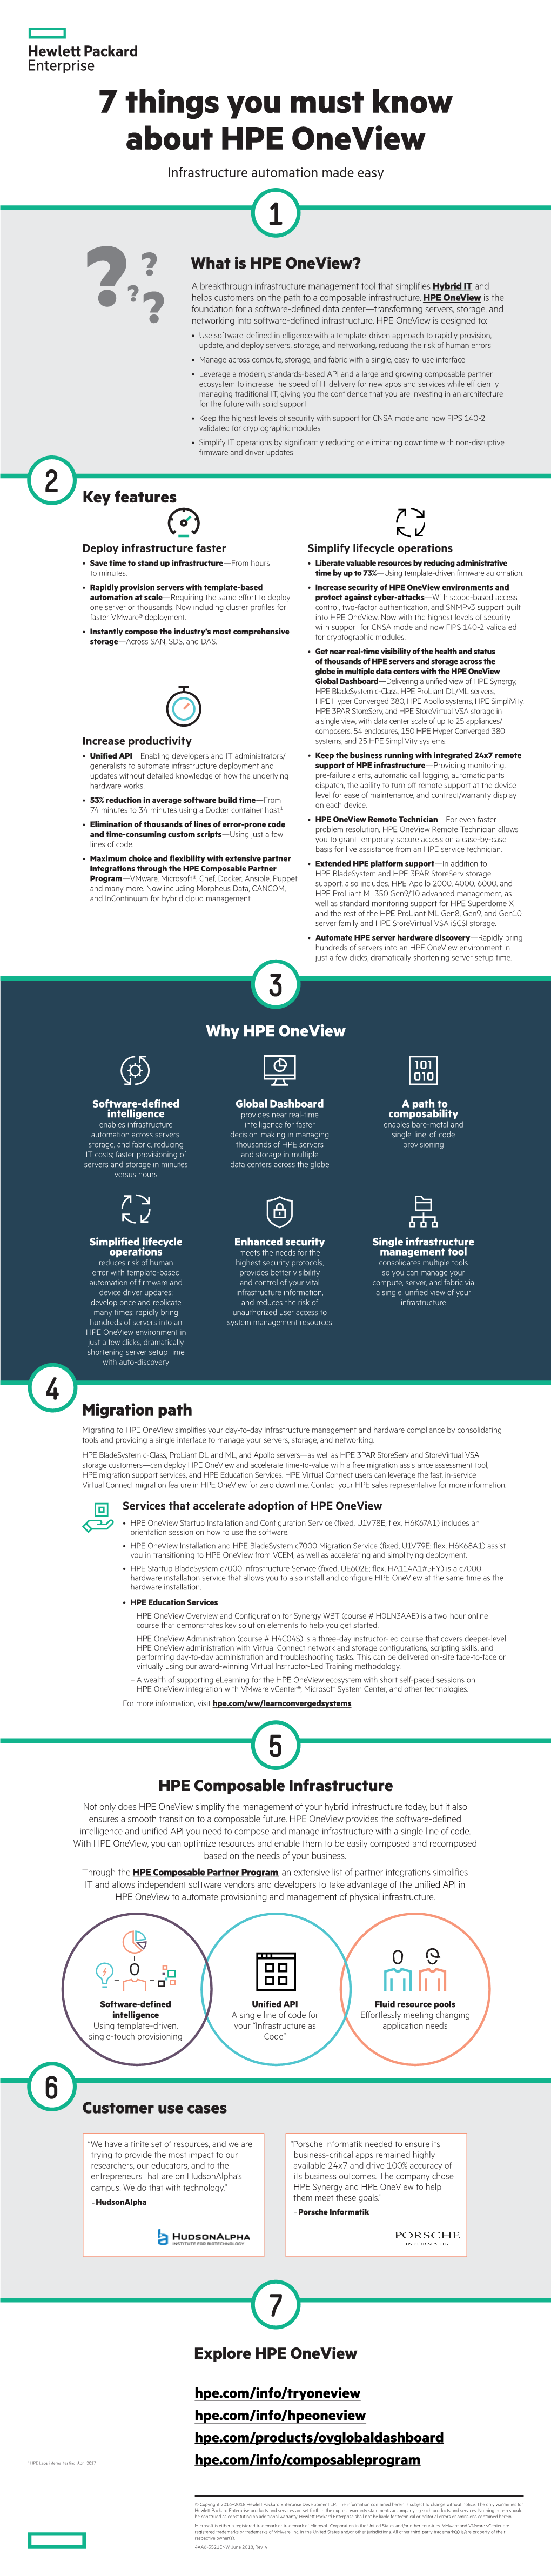 7 Things You Must Know About HPE Oneview Infographic